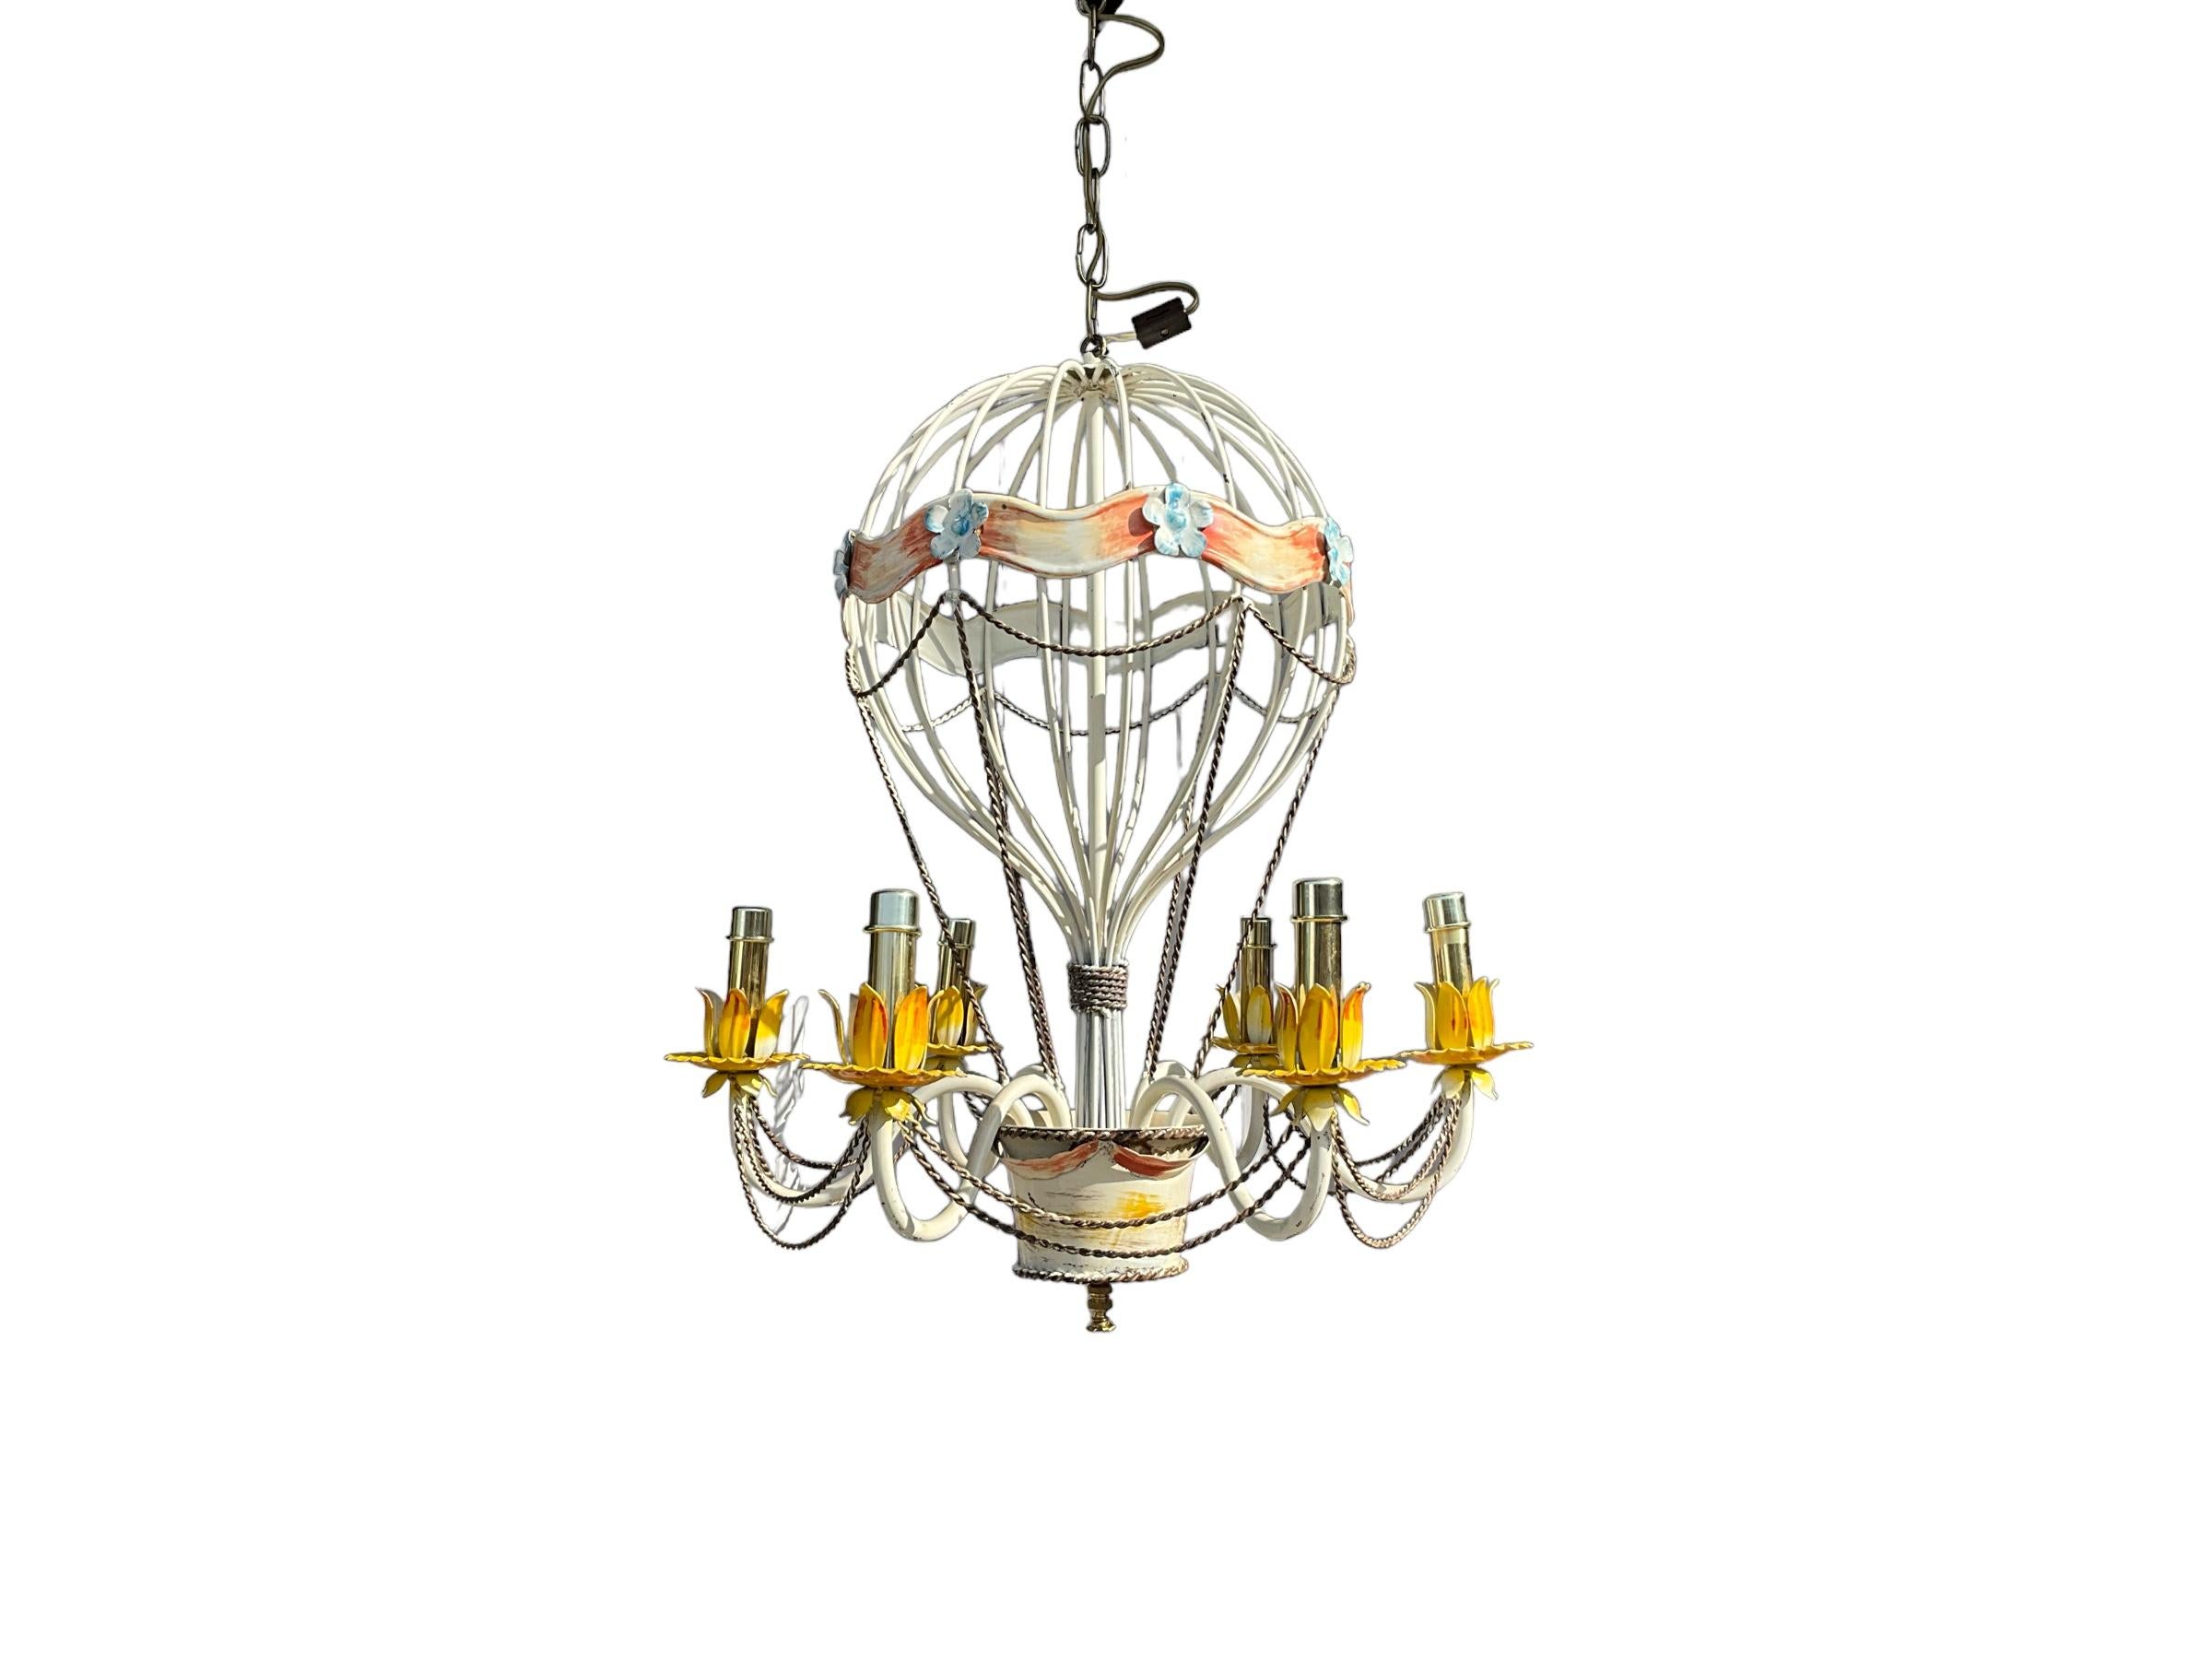 20th Century 1960s Italian Hot Air Balloon Metal Tole Chandelier W/  French Styling - 6 Arm For Sale